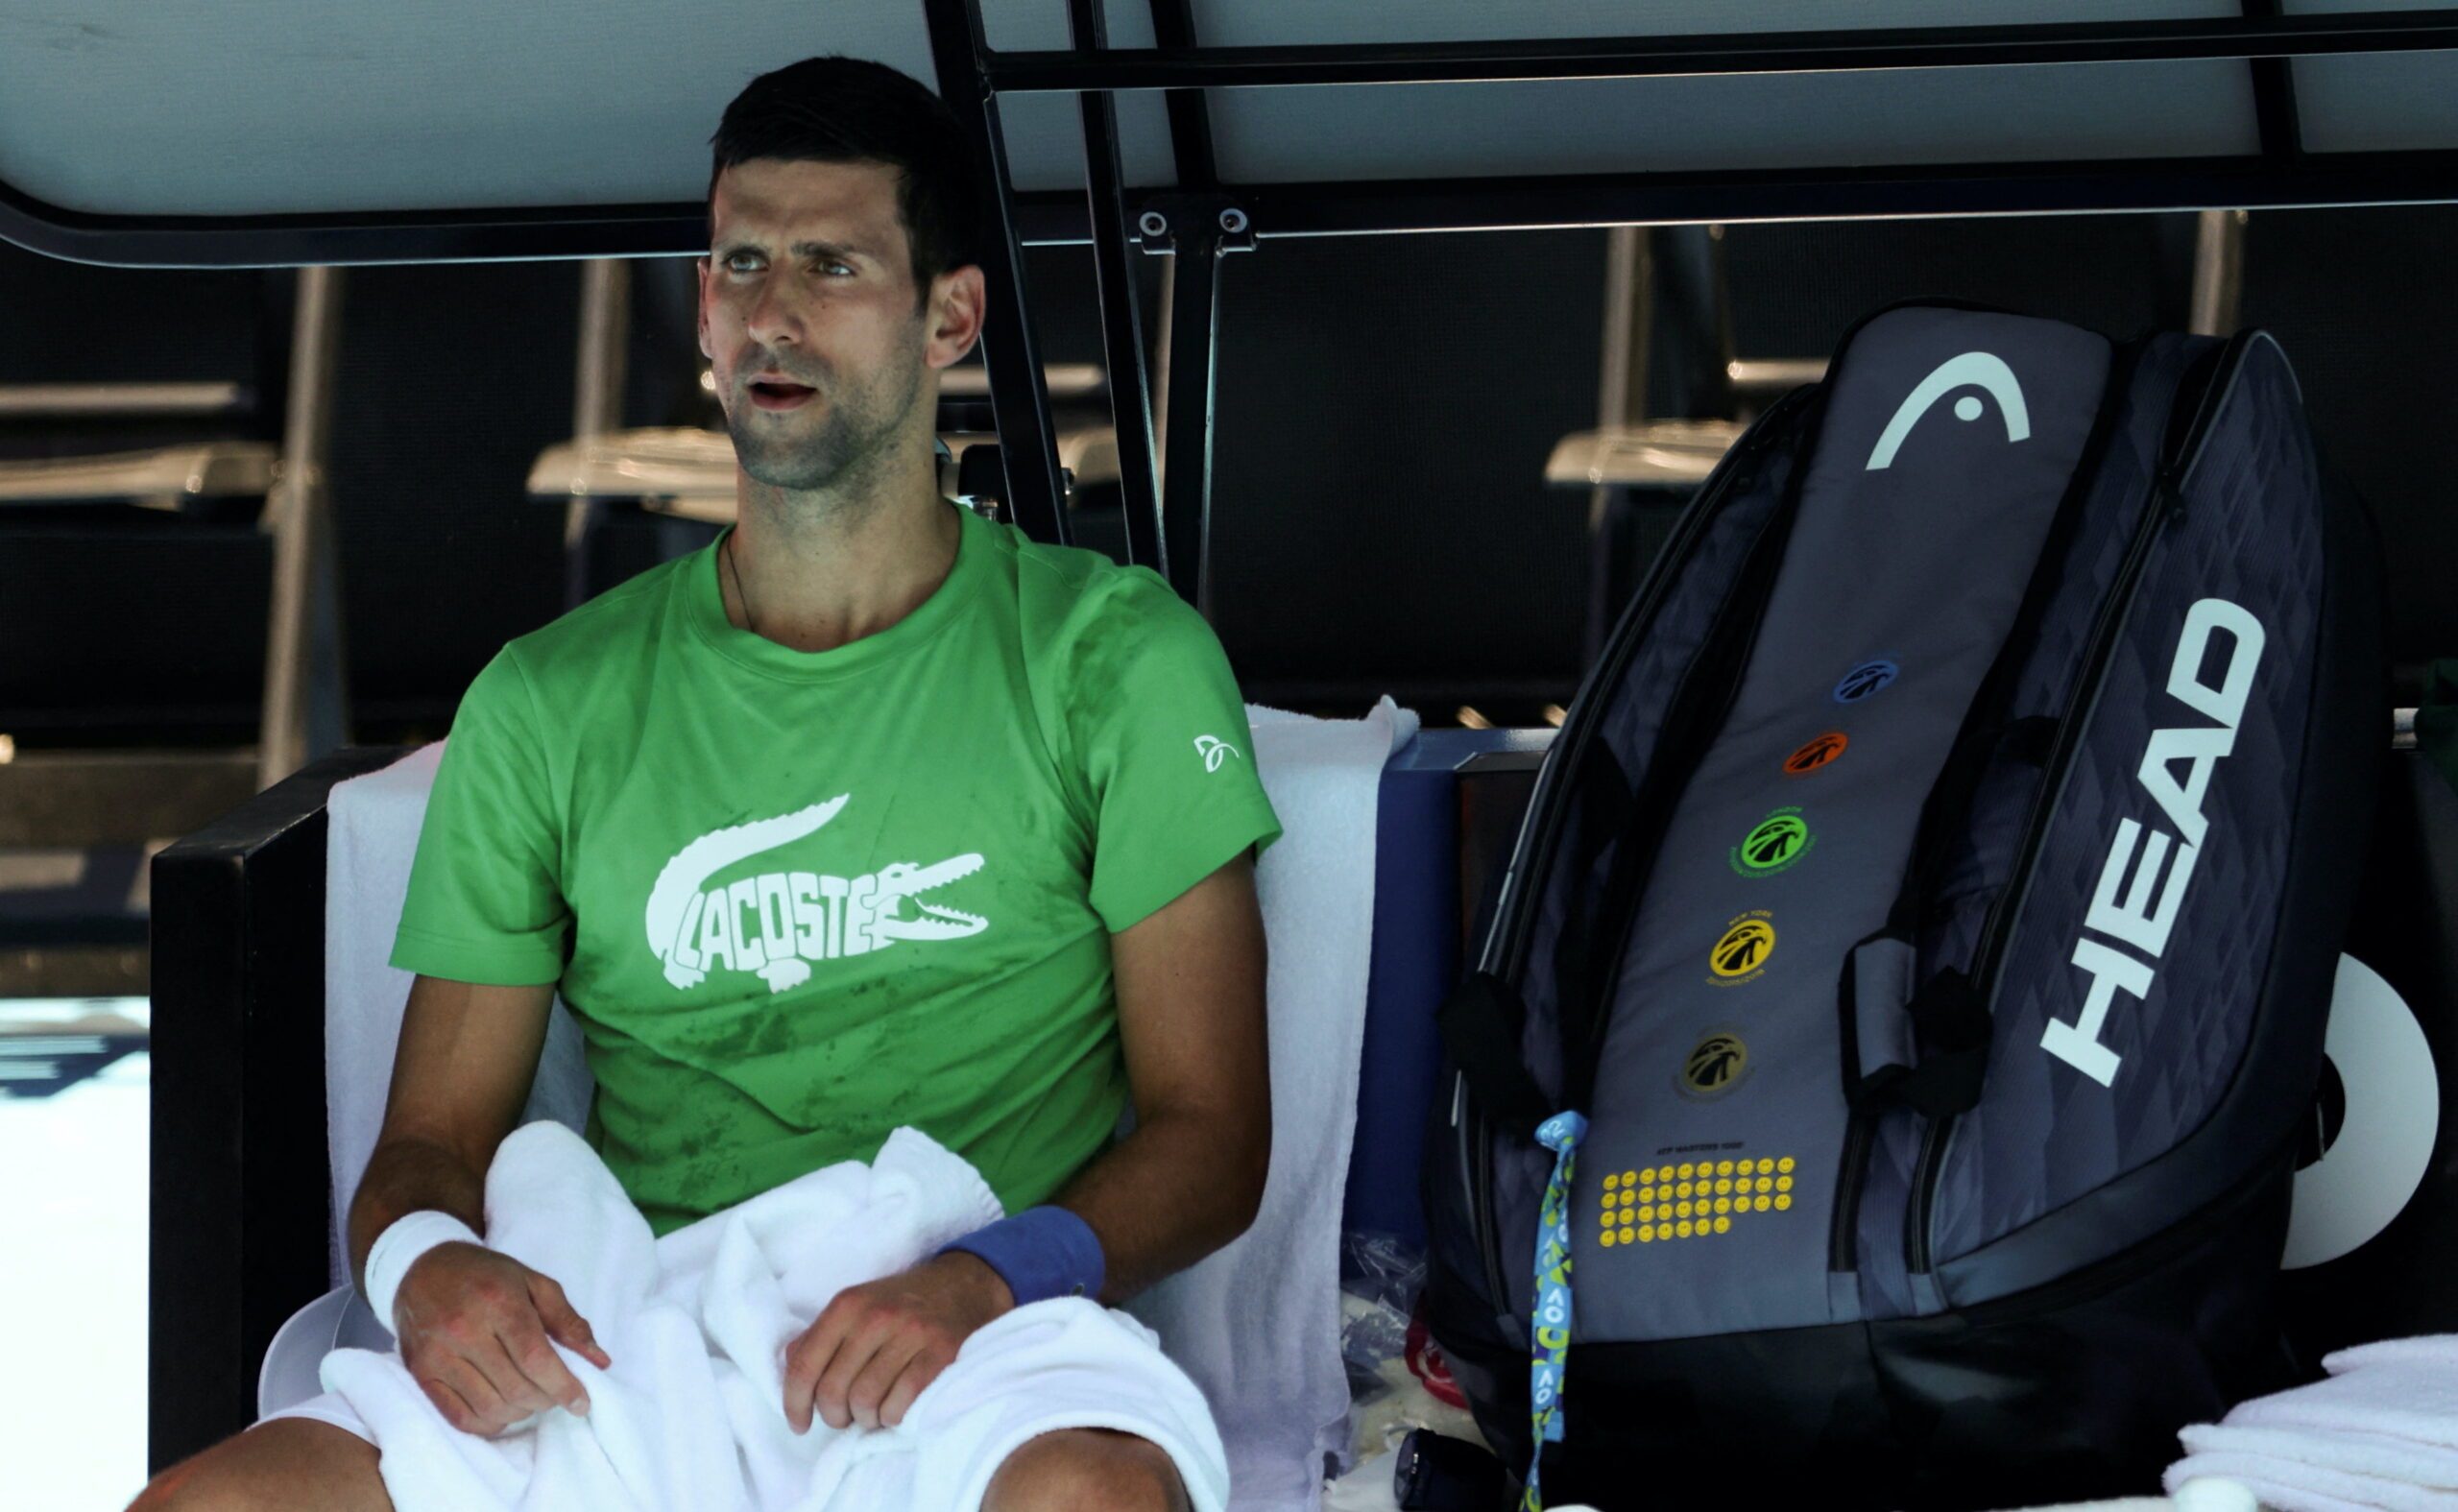 Australia leaves door open for Djokovic to play at Open next year